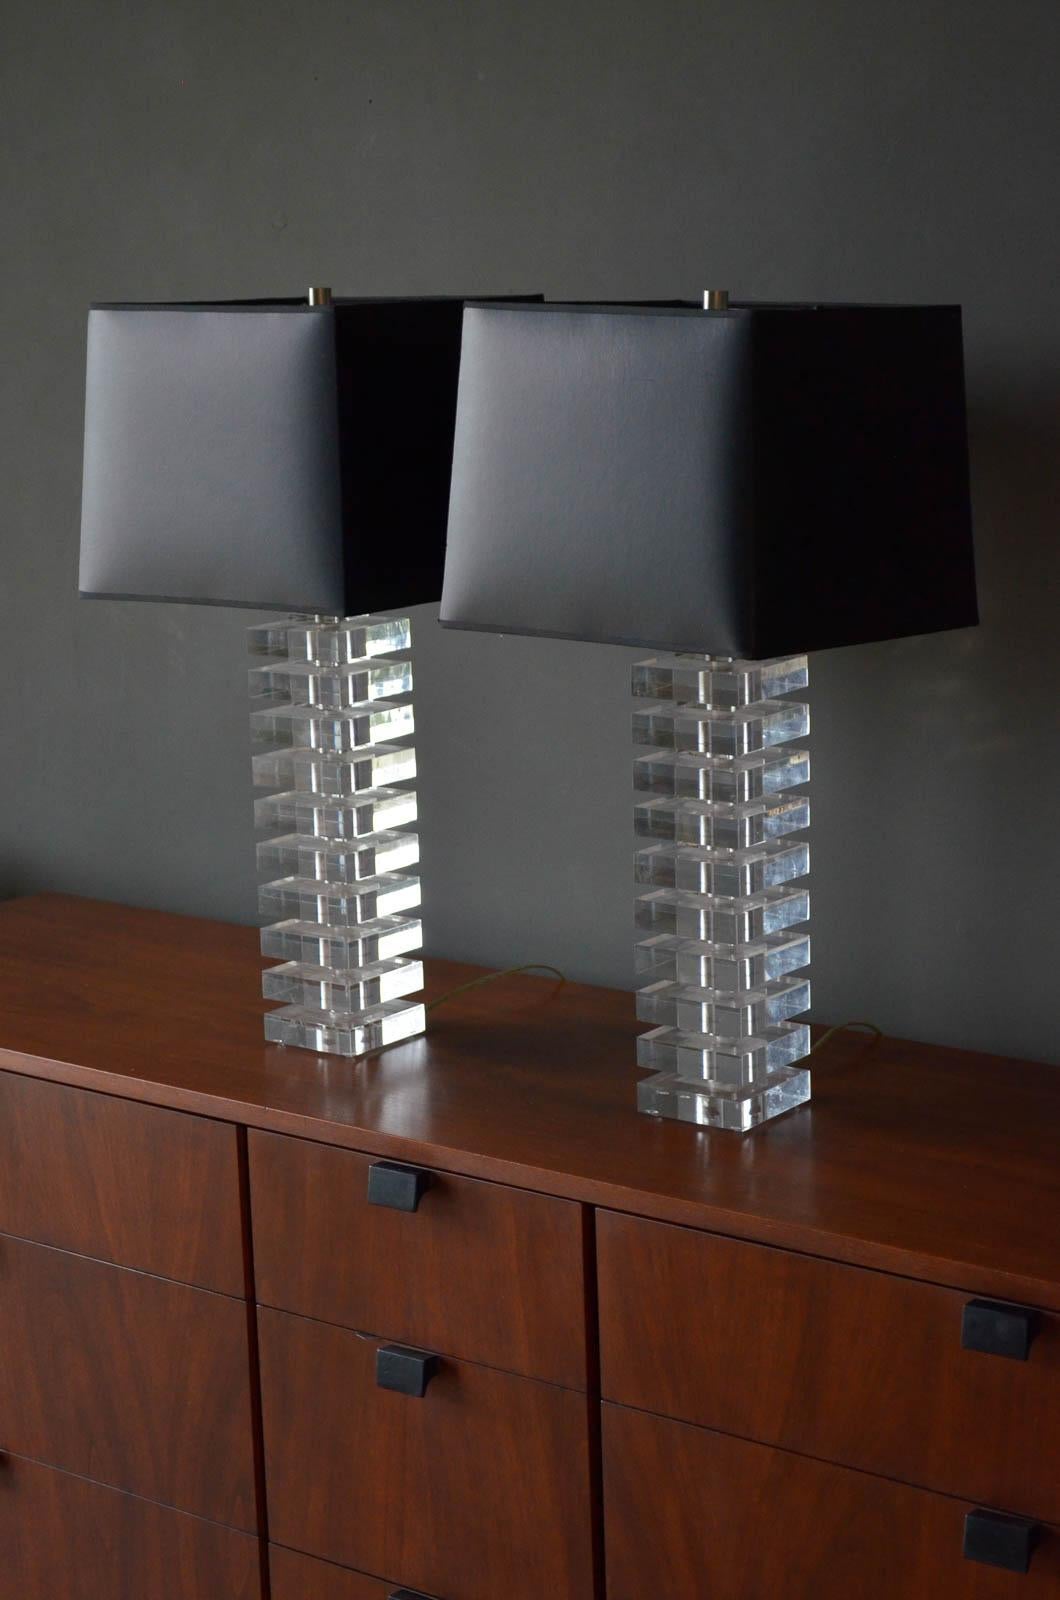 Pair of Stacked Lucite Lamps in the style of Karl Springer, ca. 1970. Beautiful condition lamps include custom black shades with matching silver lining. Original wiring in working condition.

Measure 4